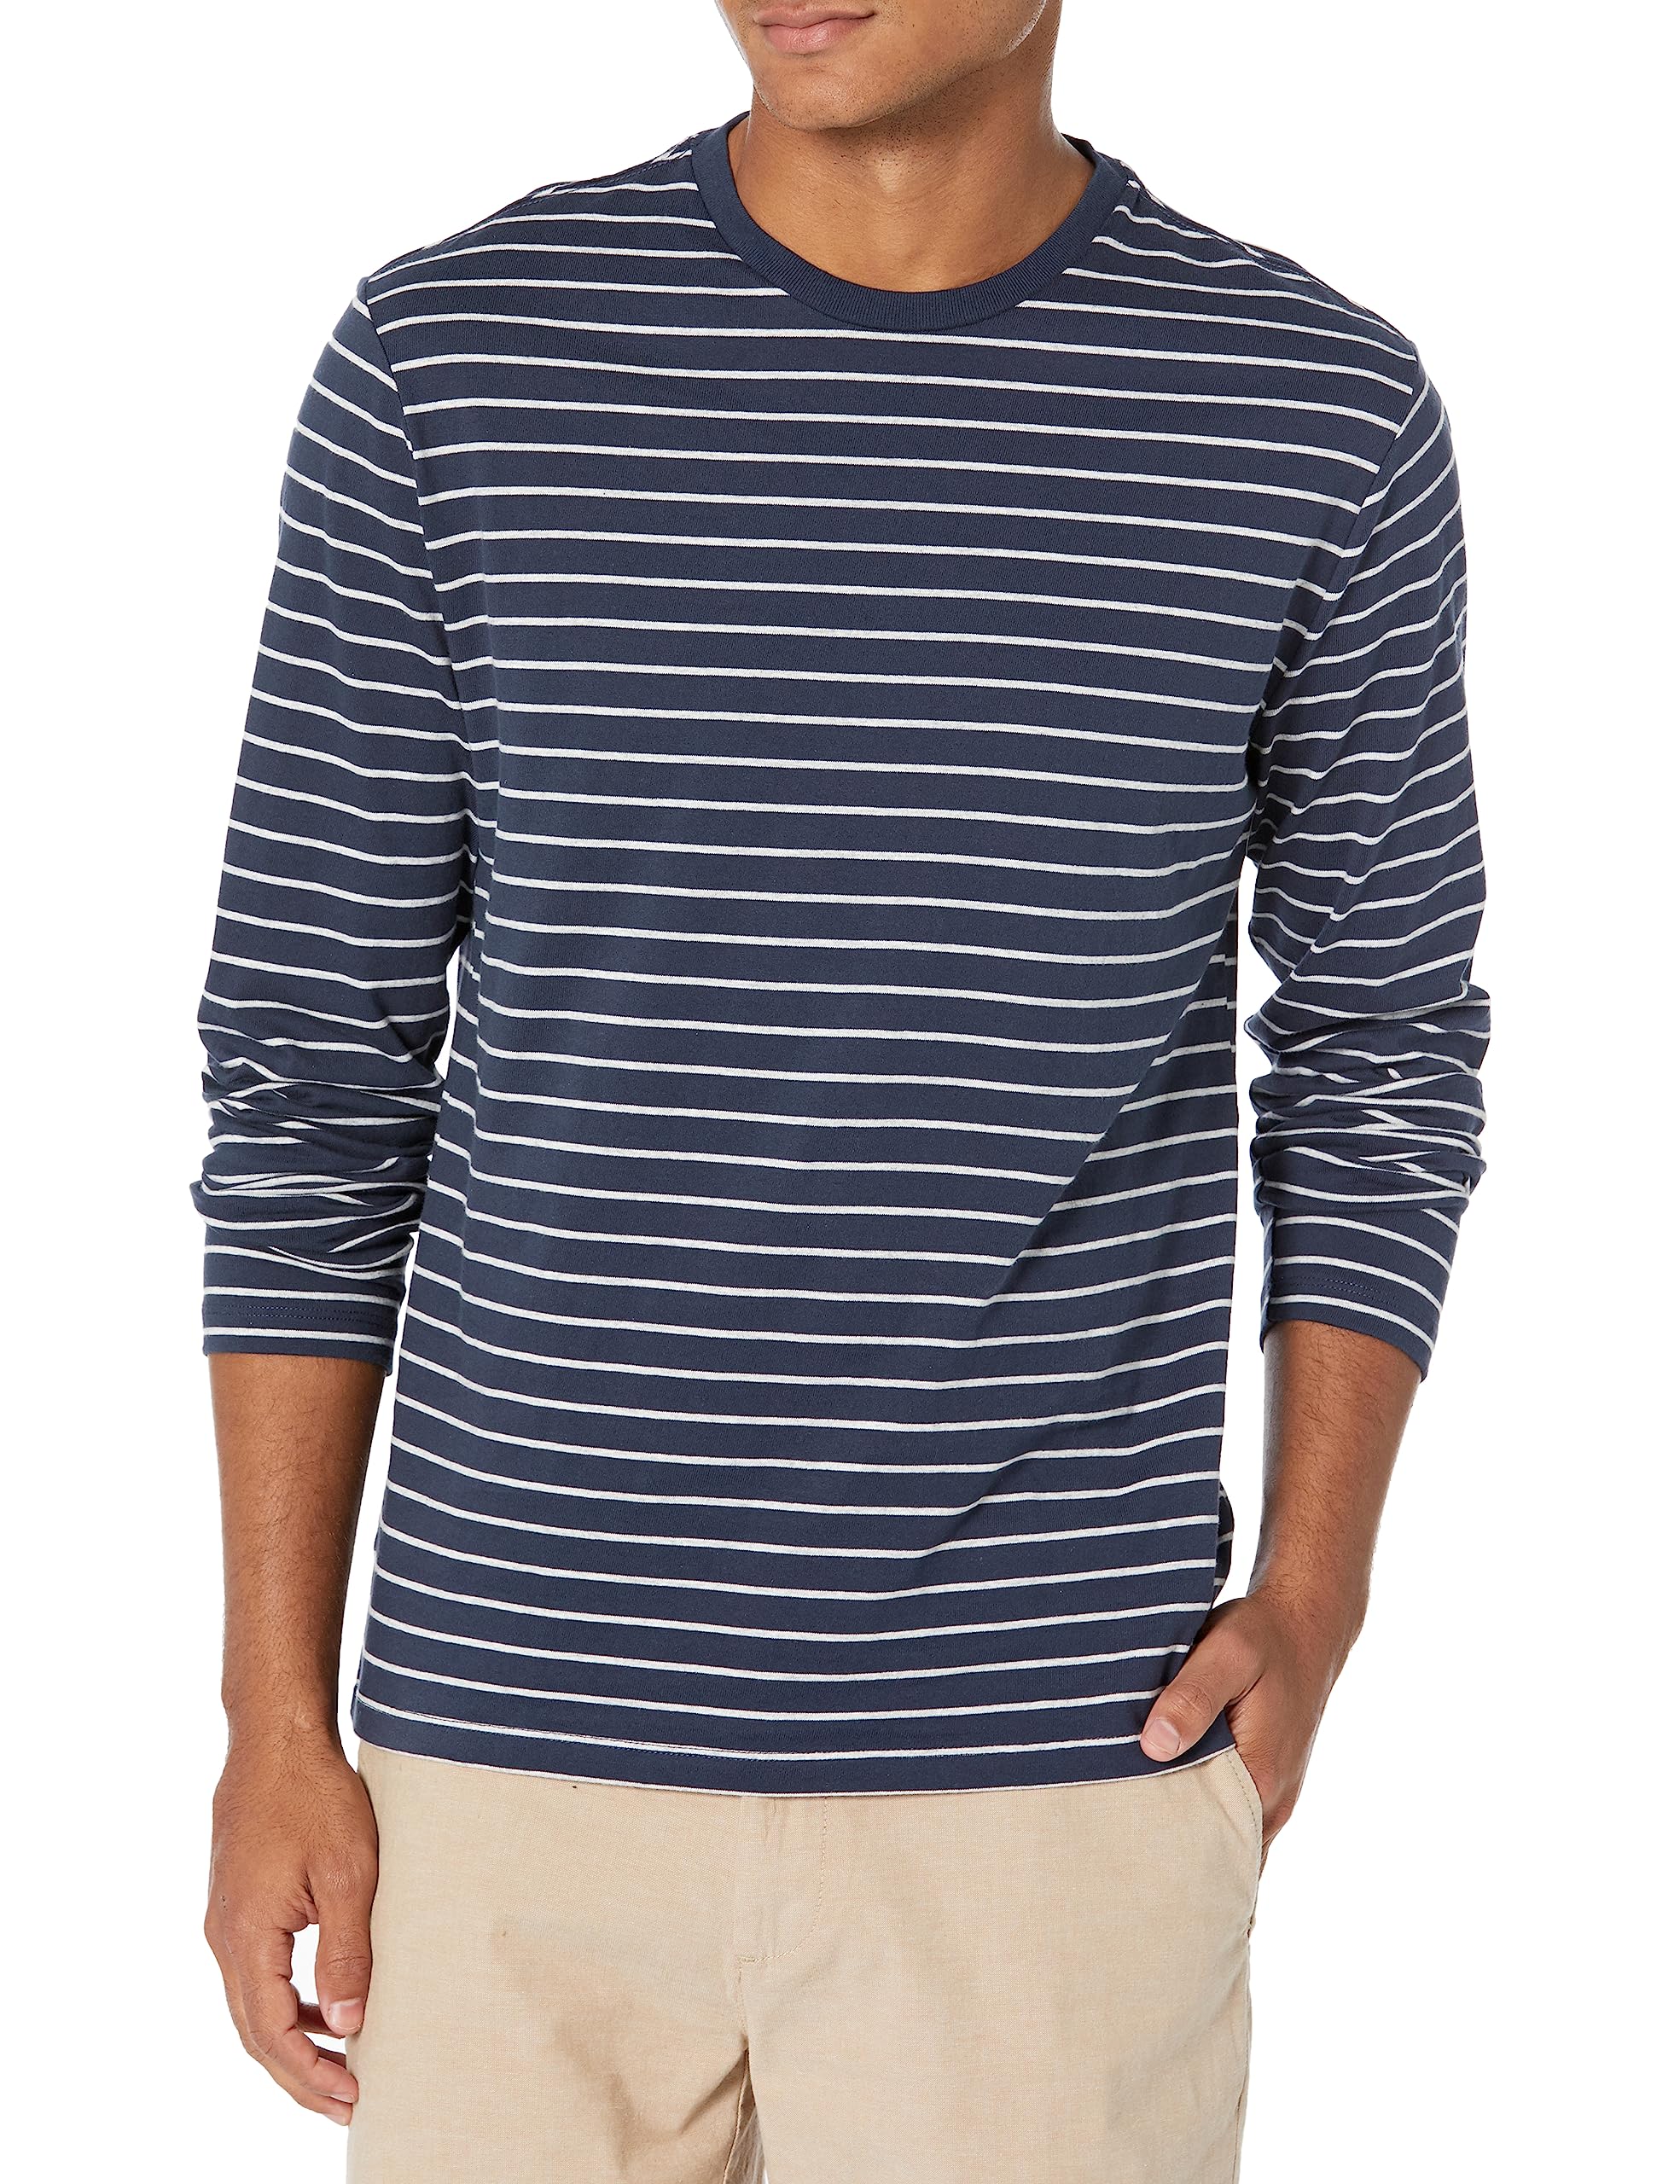 Amazon Essentials Men's Slim-Fit Long-Sleeve T-Shirt $4.40 + Free Shipping w/ Prime or on $35+